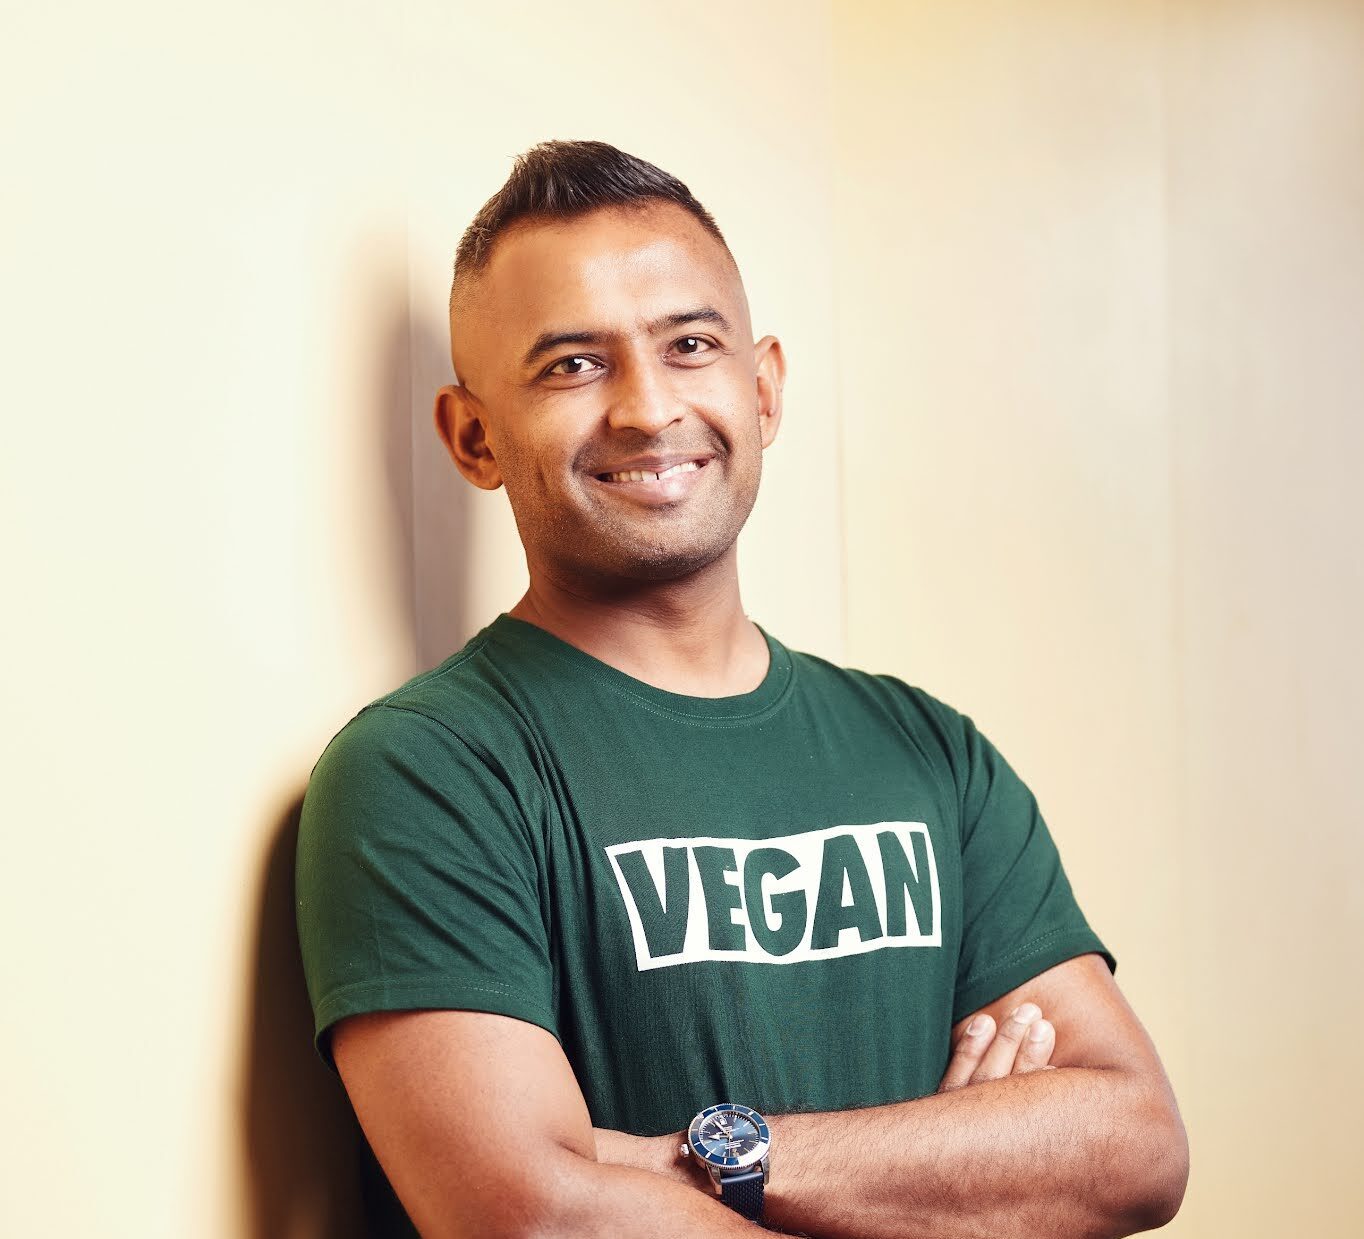 Only Earth: Disrupting the Plant-Based Food Business Scene